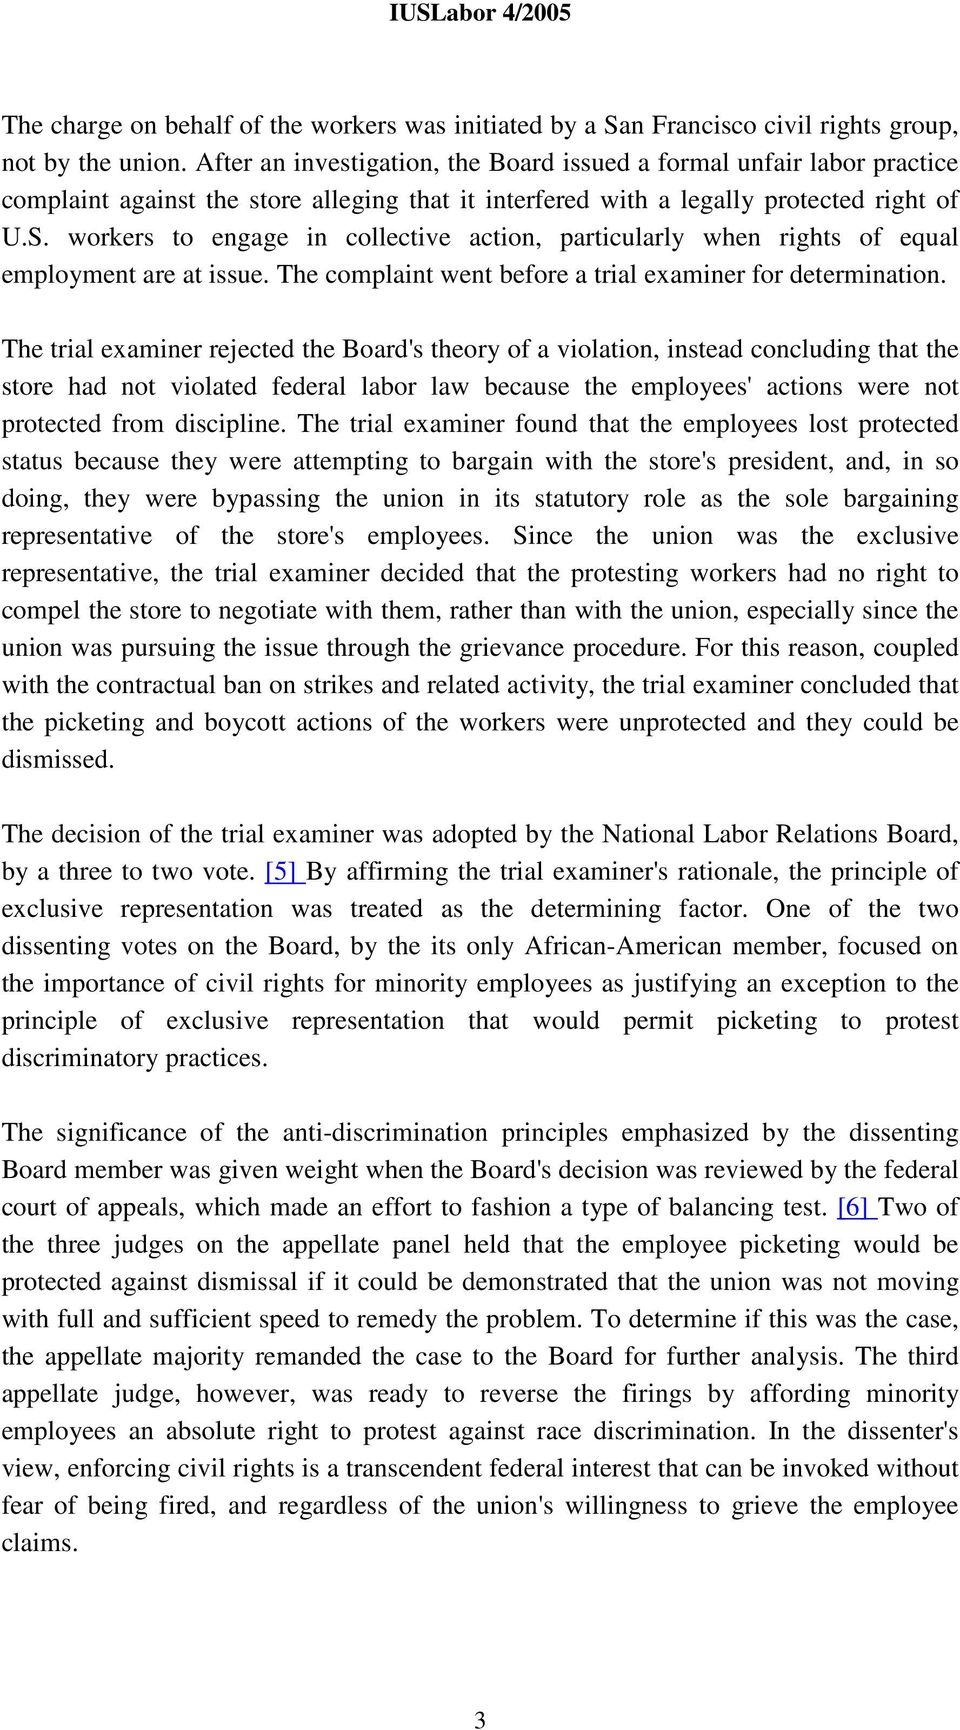 workers to engage in collective action, particularly when rights of equal employment are at issue. The complaint went before a trial examiner for determination.